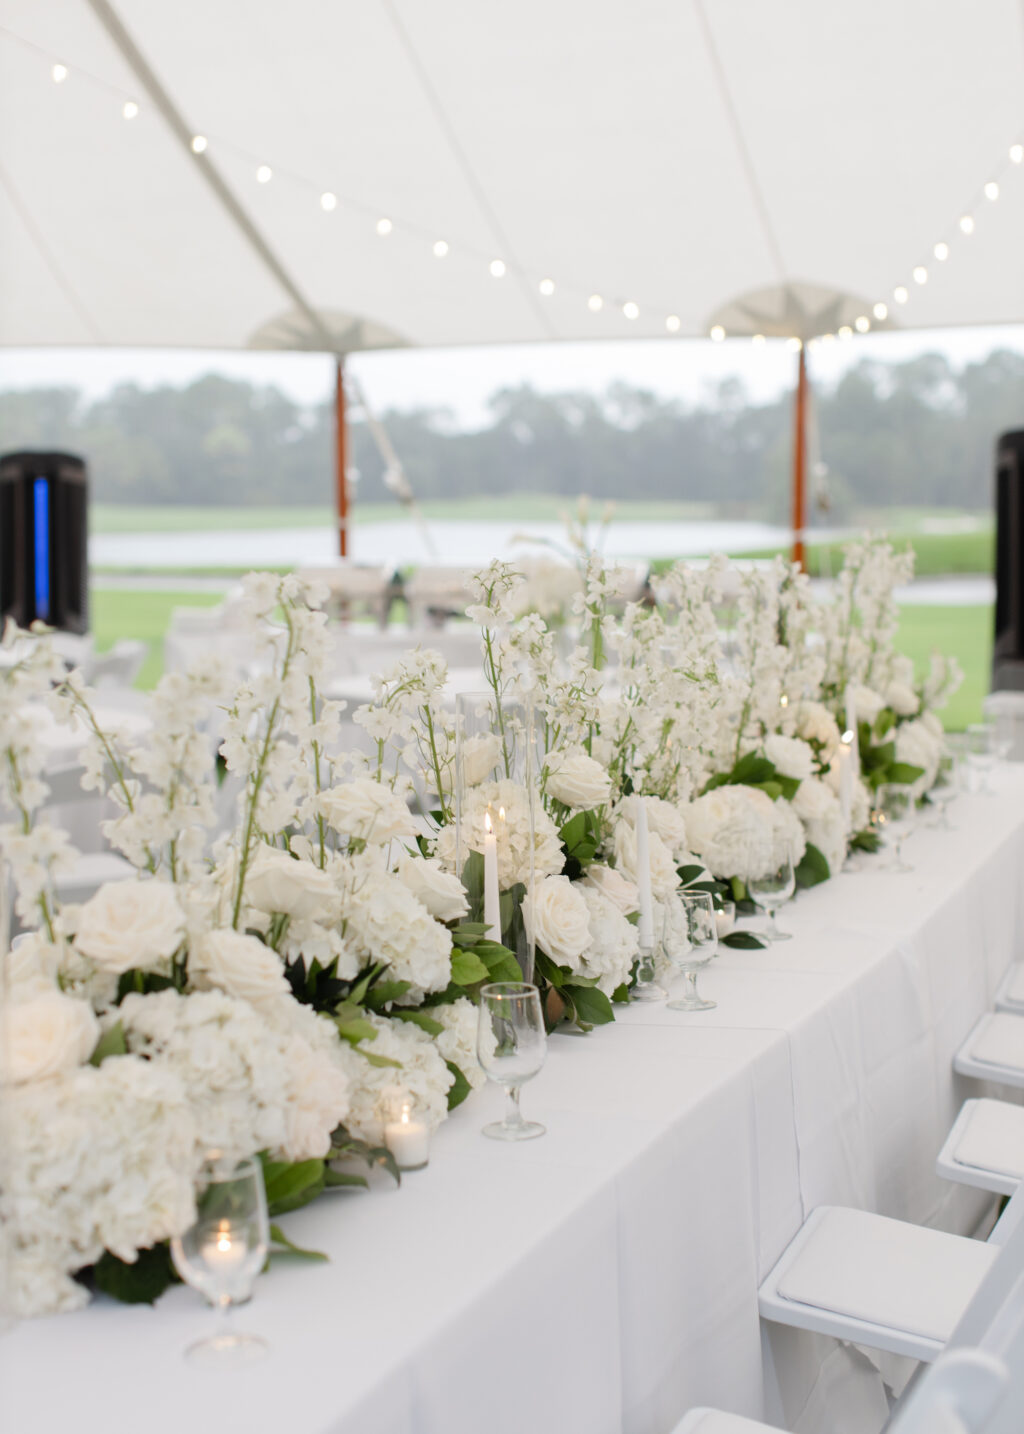 Classic White Stock, Garden Roses, and Hydrangeas Feasting Table Centerpieces | Sailcloth Tent | White Folding Garden Chairs | Timeless Wedding Reception Inspiration